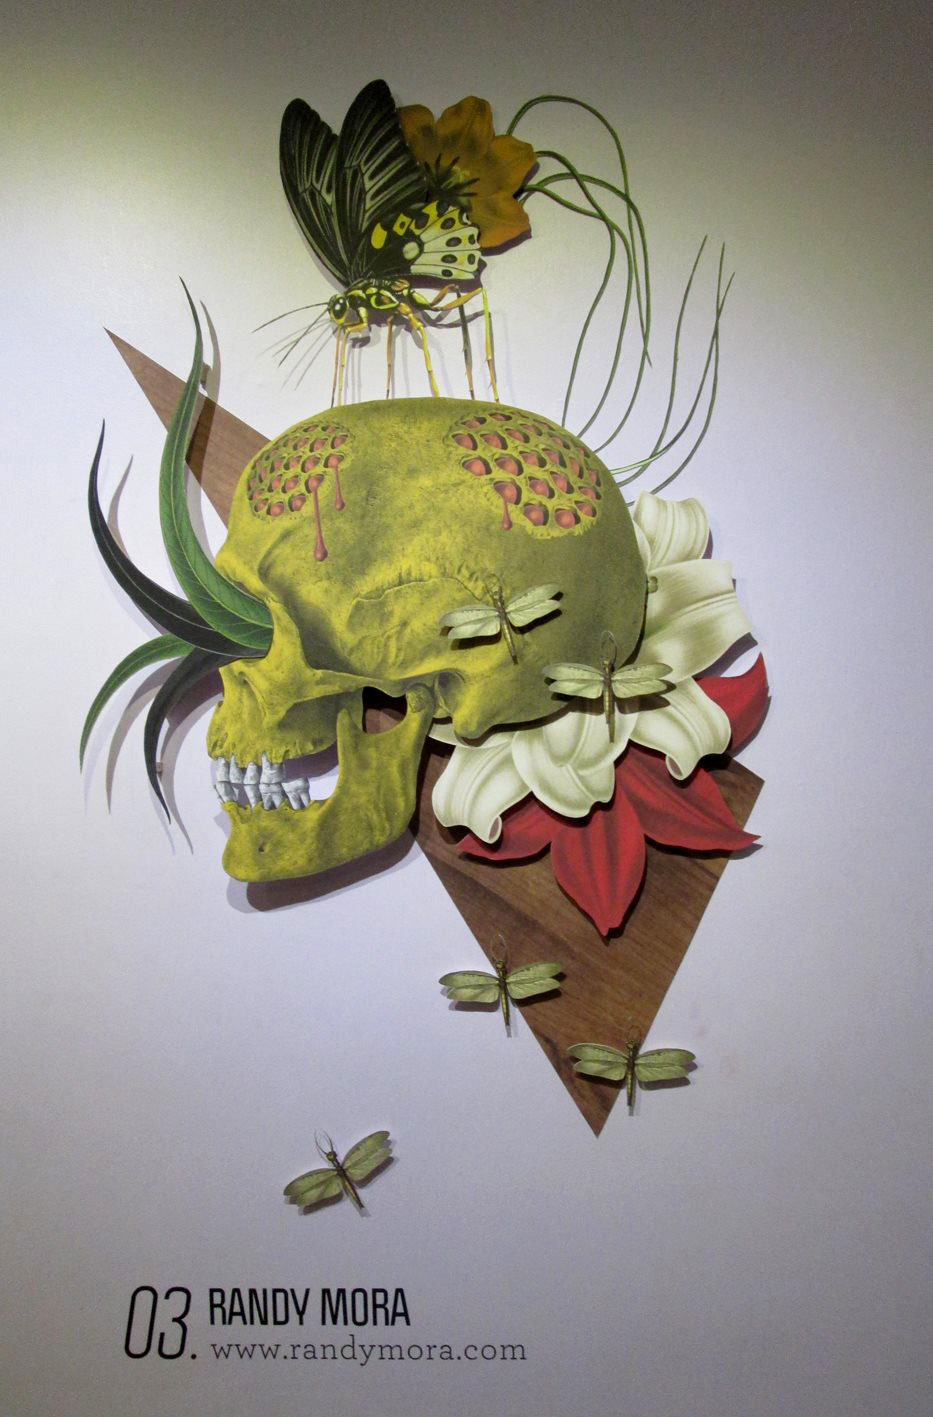 grafica margen medellin colombia layers Mural wall bichos bugs skull randy mora collage digital Assemblage